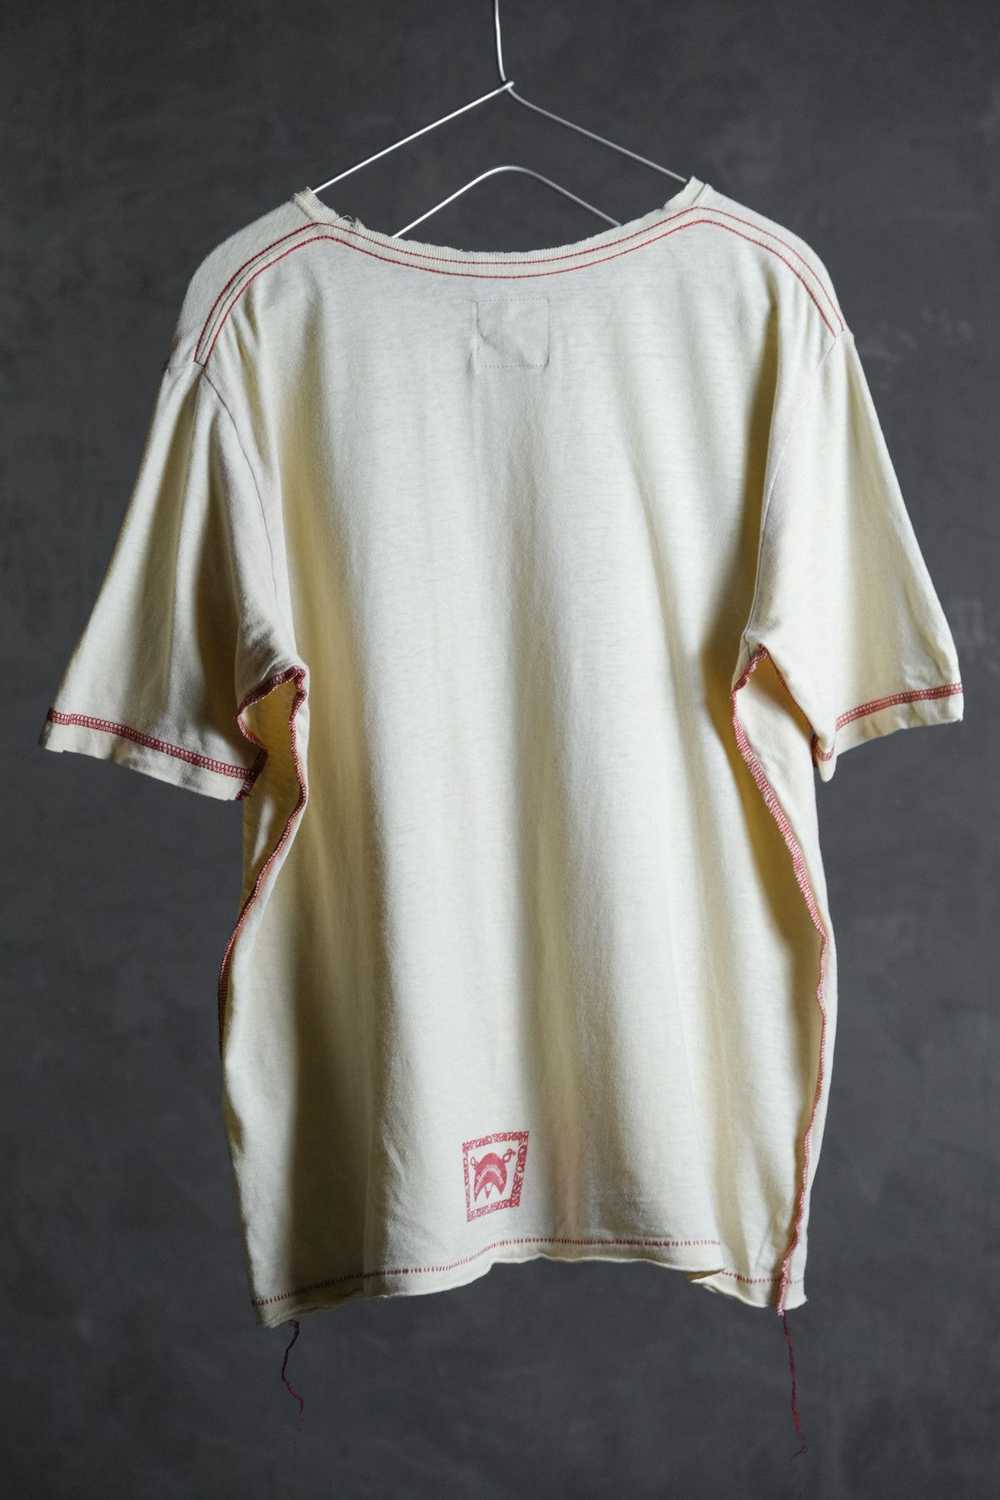 Undercover Undercover 03S/S “Scab” Tee - image 6